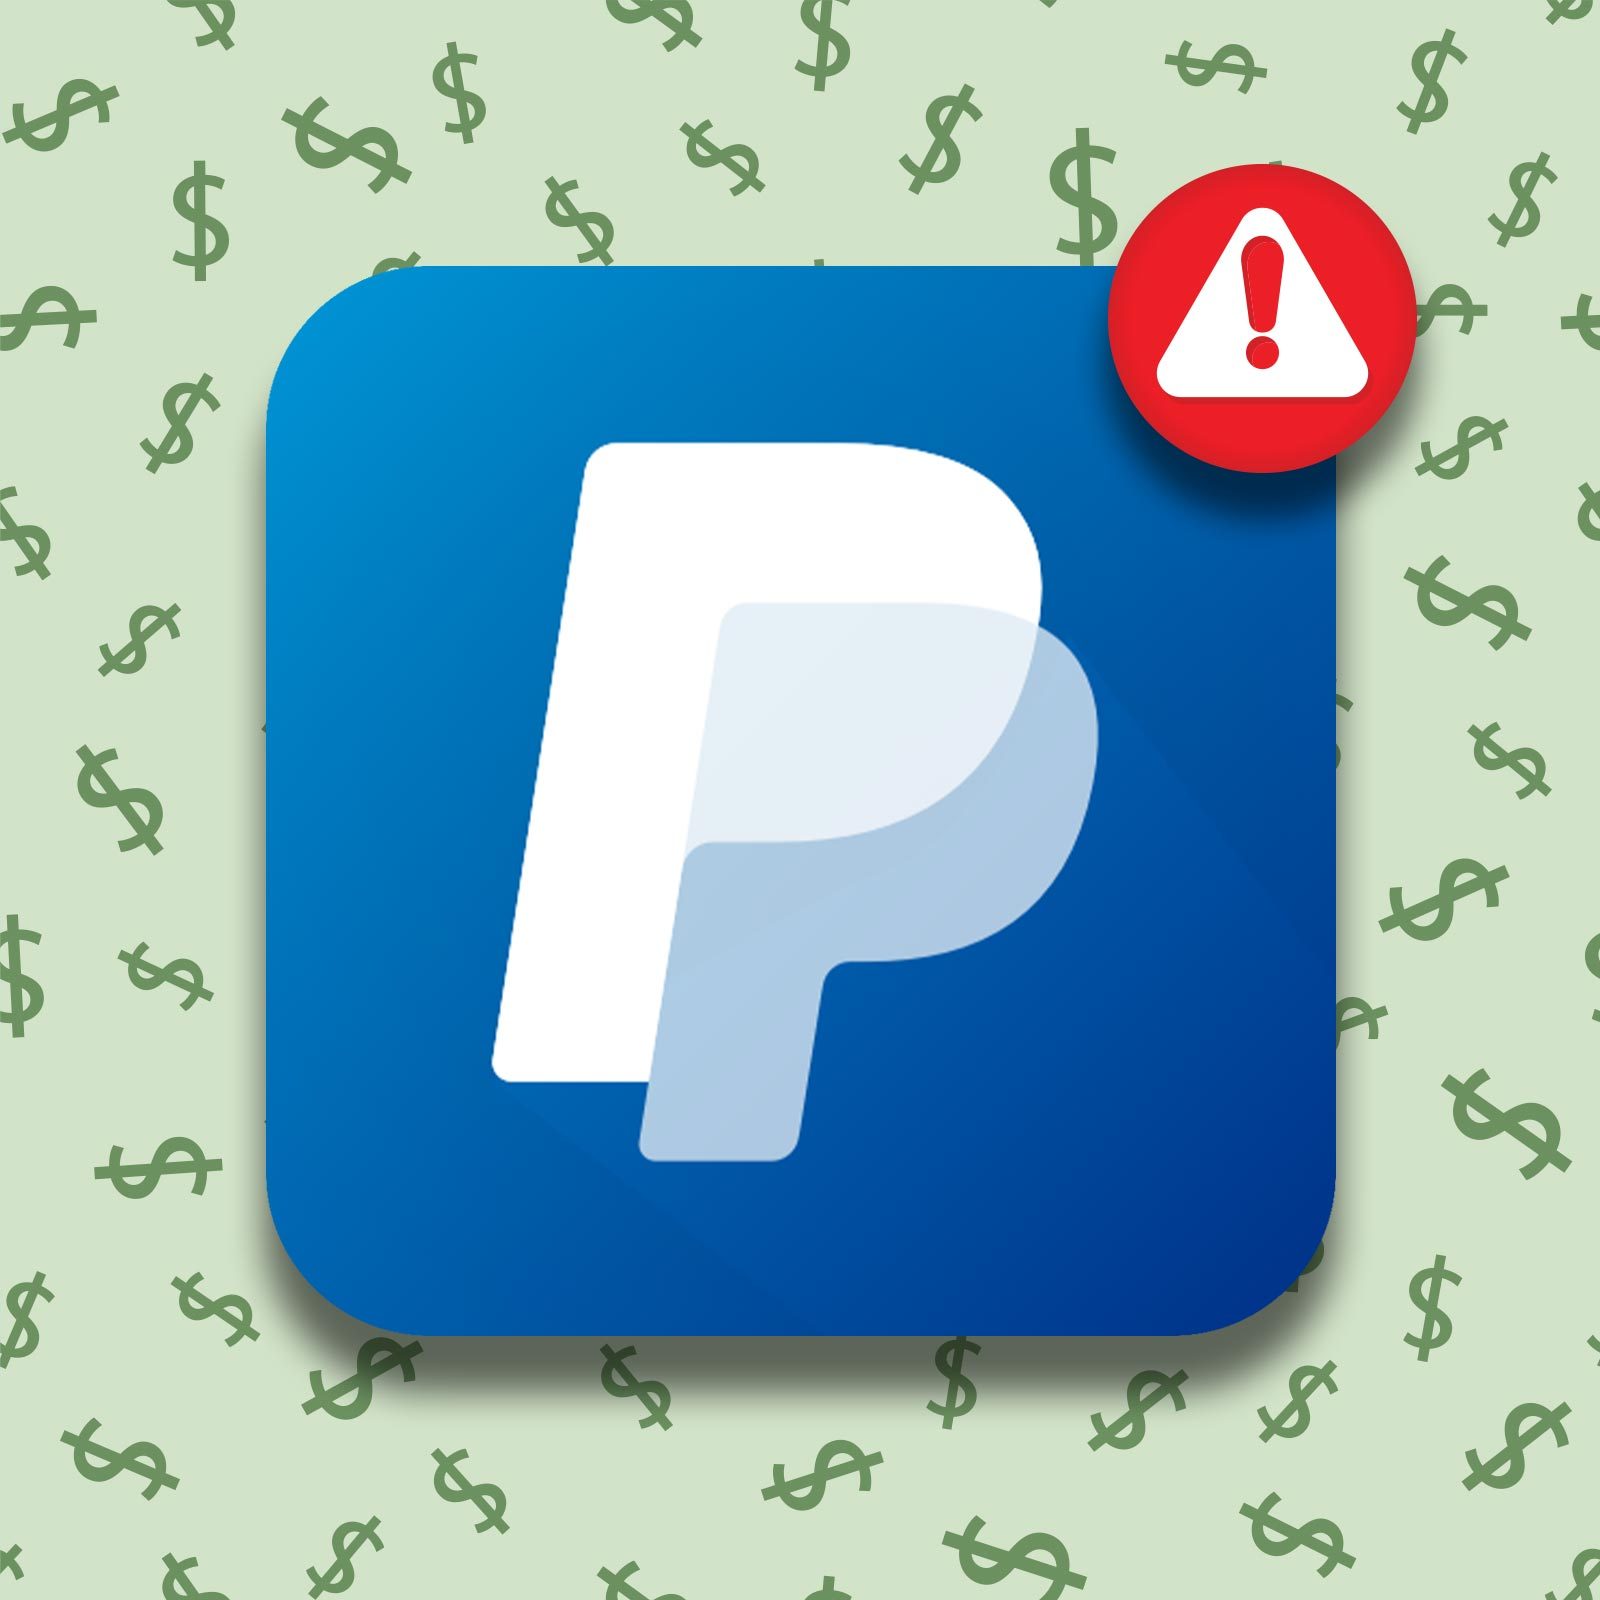 PayPal hacking: How I could have stolen money from my friend's PayPal